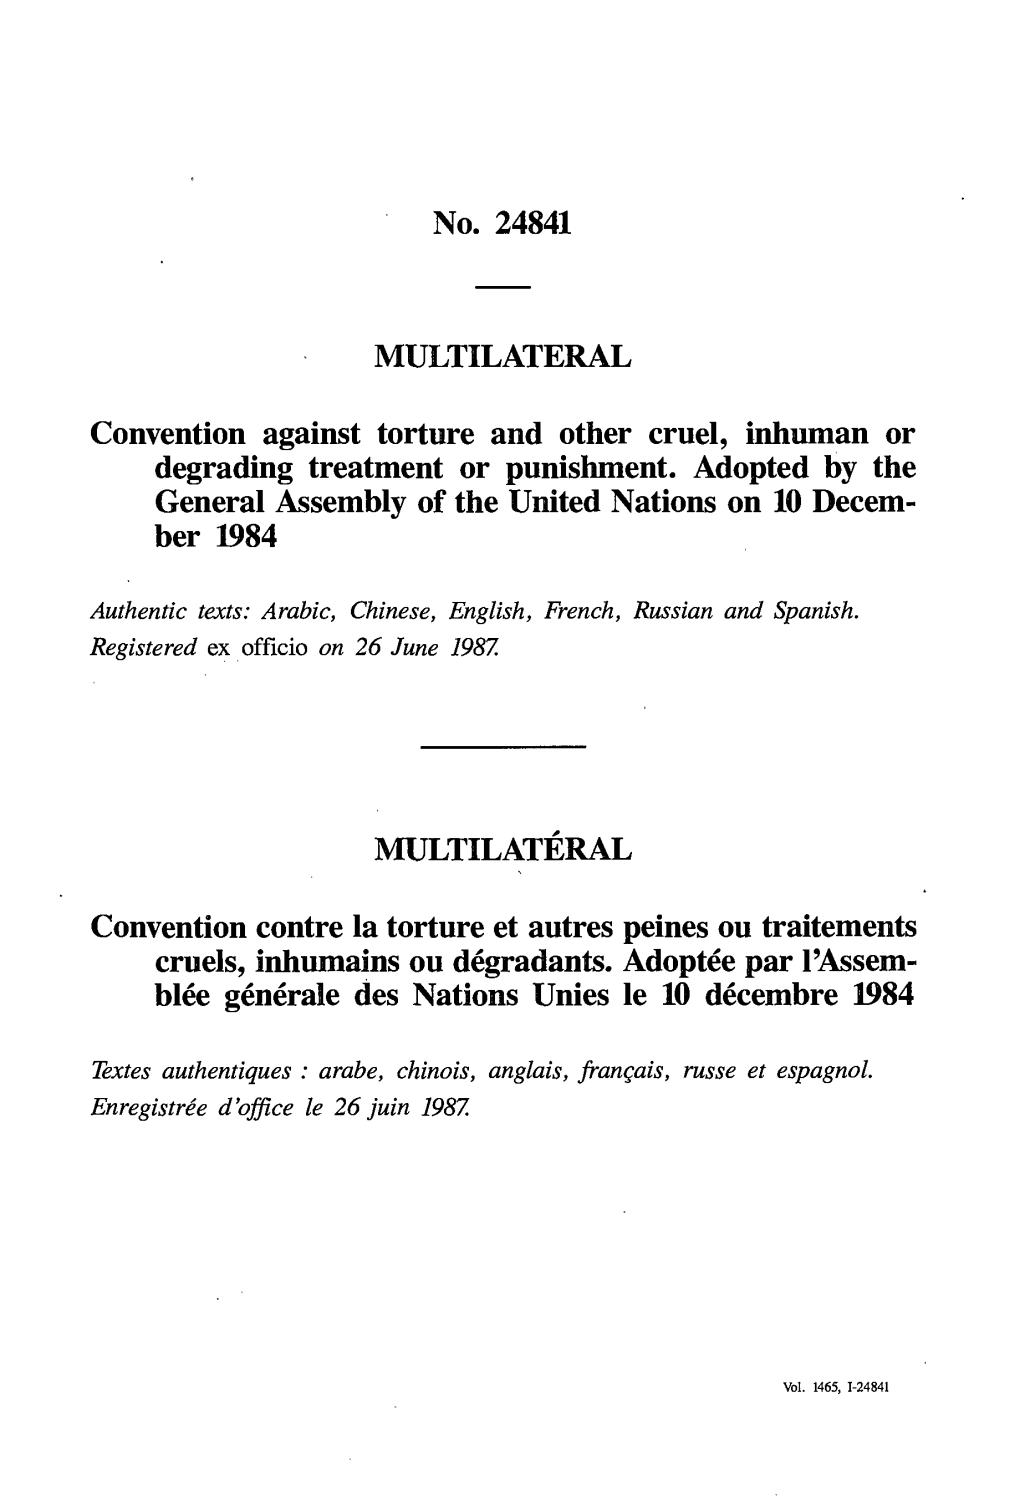 No. 24841 MULTILATERAL Convention Against Torture And